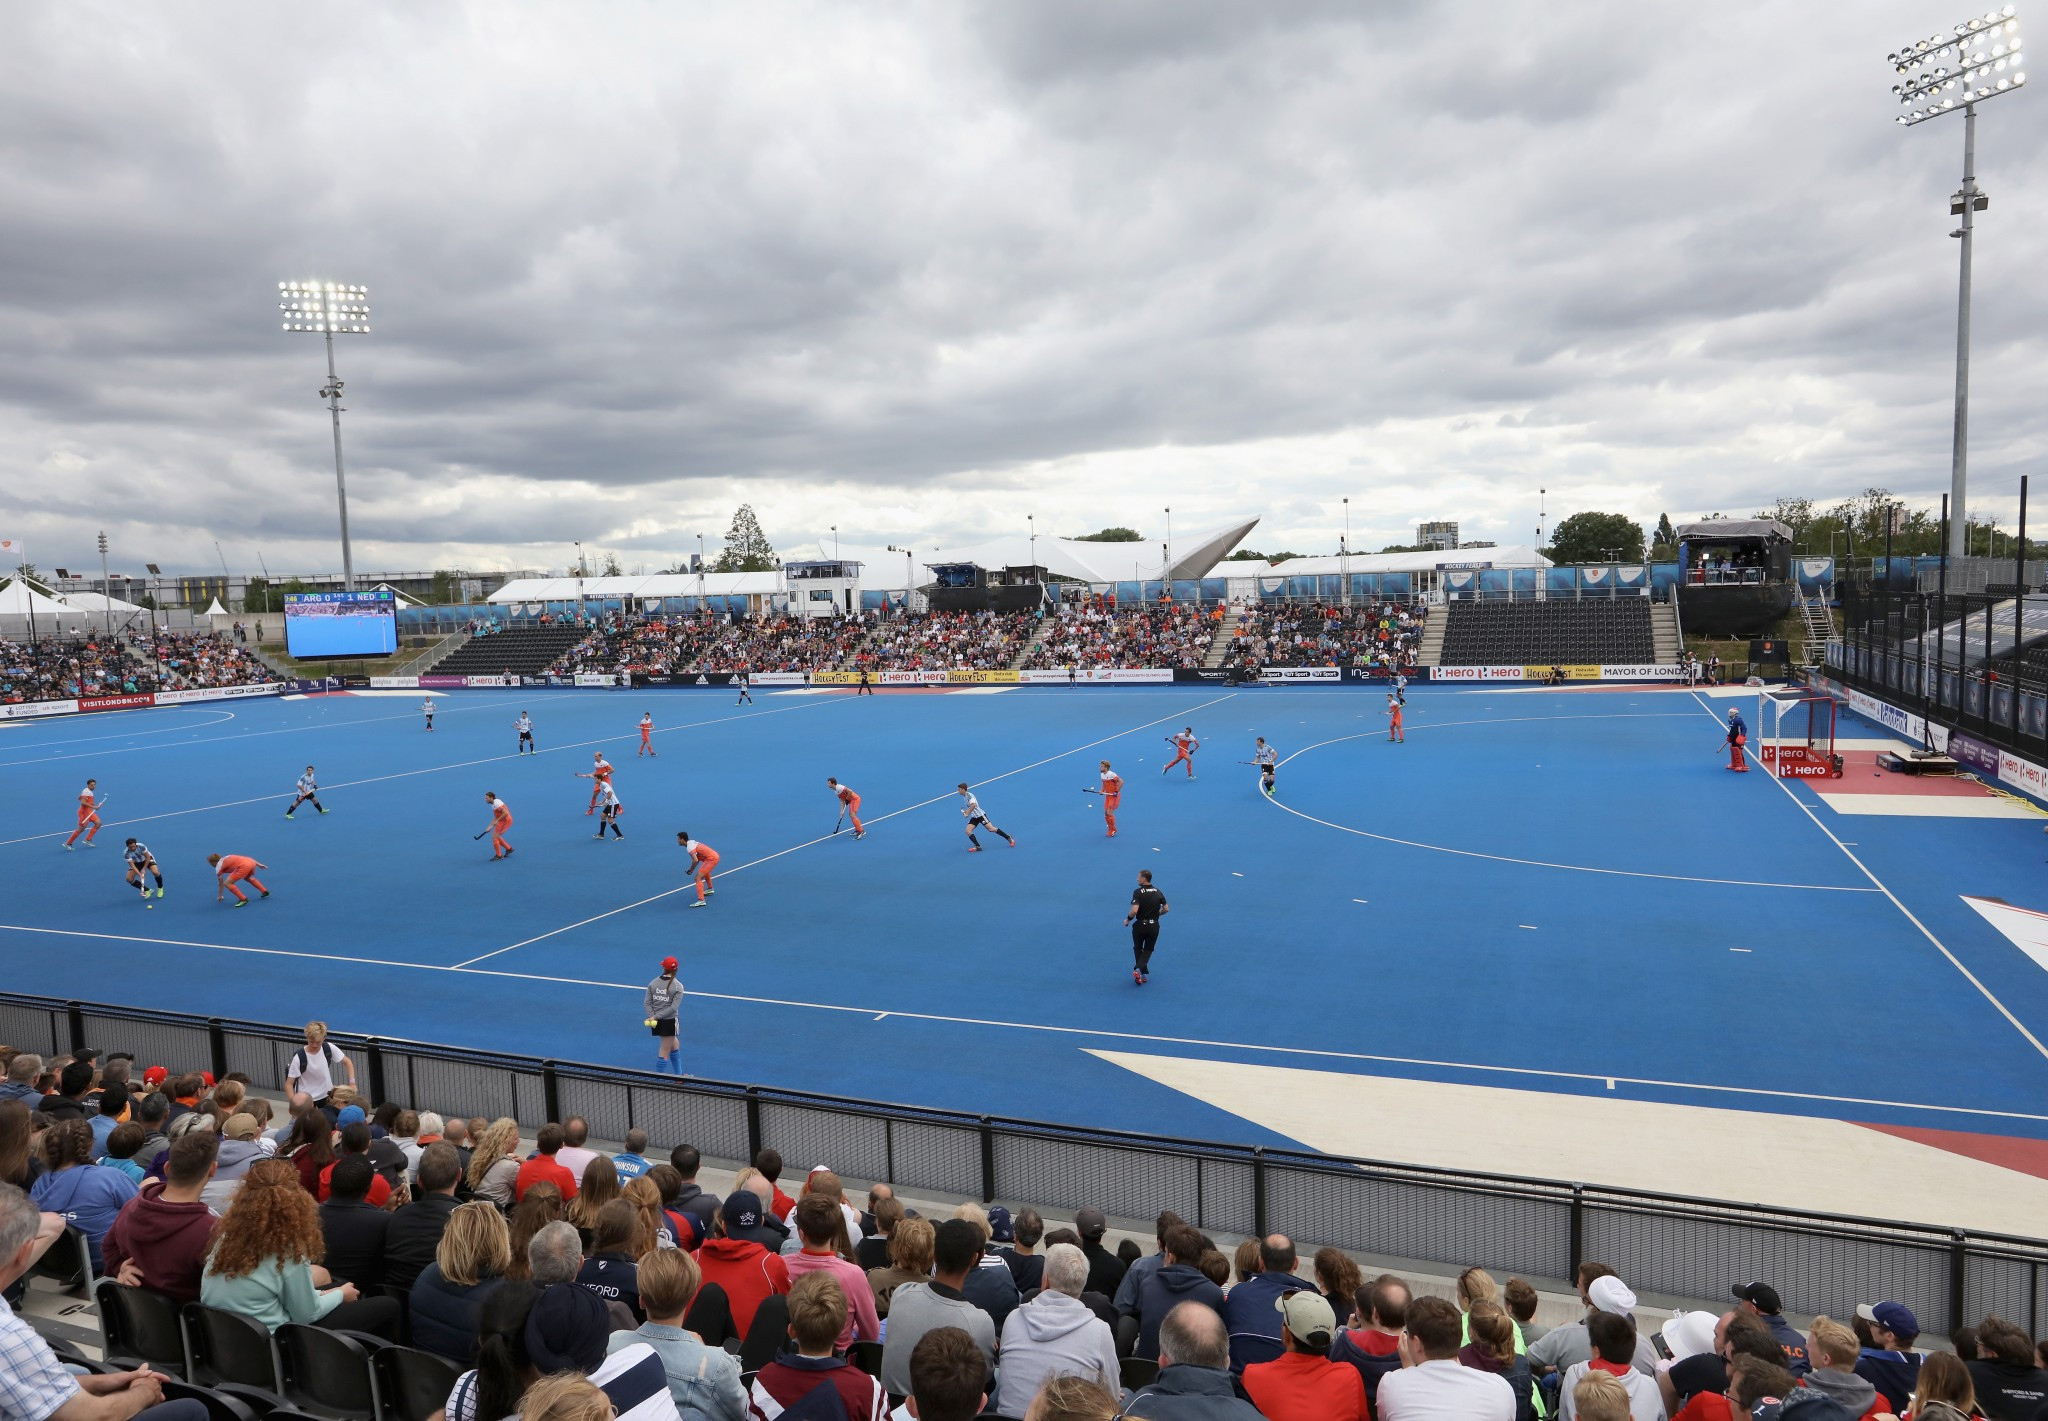 FIH and England Hockey launch public ticket ballot for 2018 World Cup